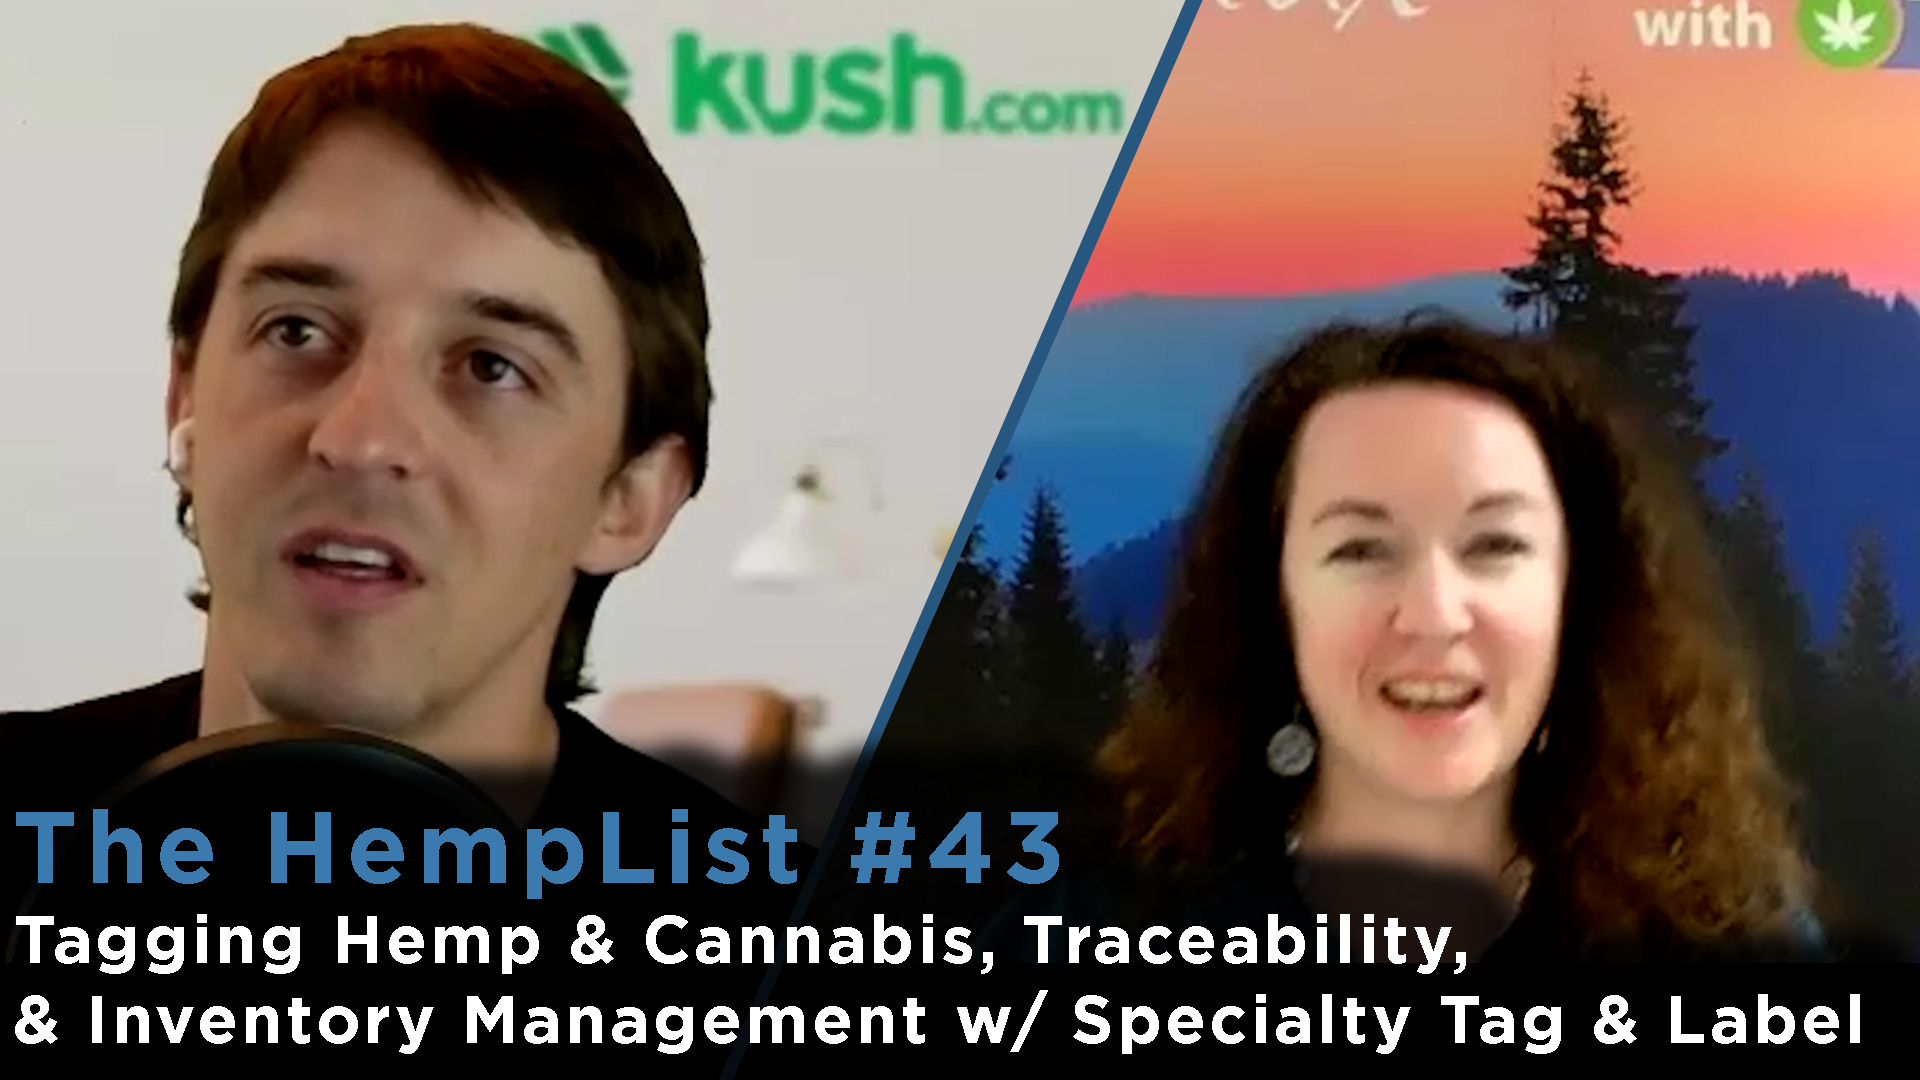 The HempList #43: Tagging Hemp & Cannabis, Traceability, Inventory Management w/ Specialty Tag & Label